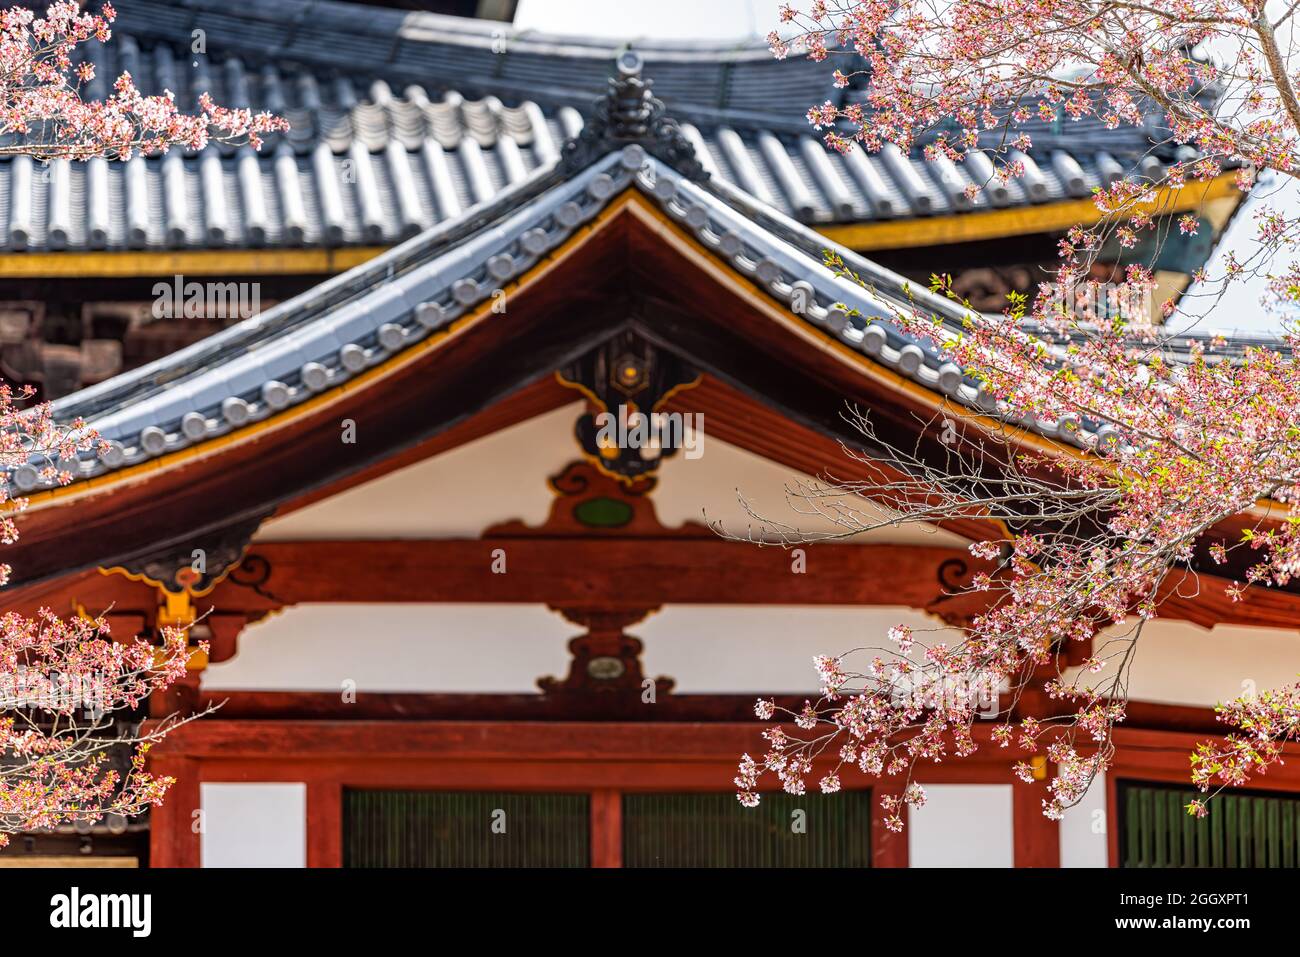 Todaiji temple in Nara, Japan city in spring with cherry blossom sakura flowers framing architecture pagoda roof tiles and red color Stock Photo